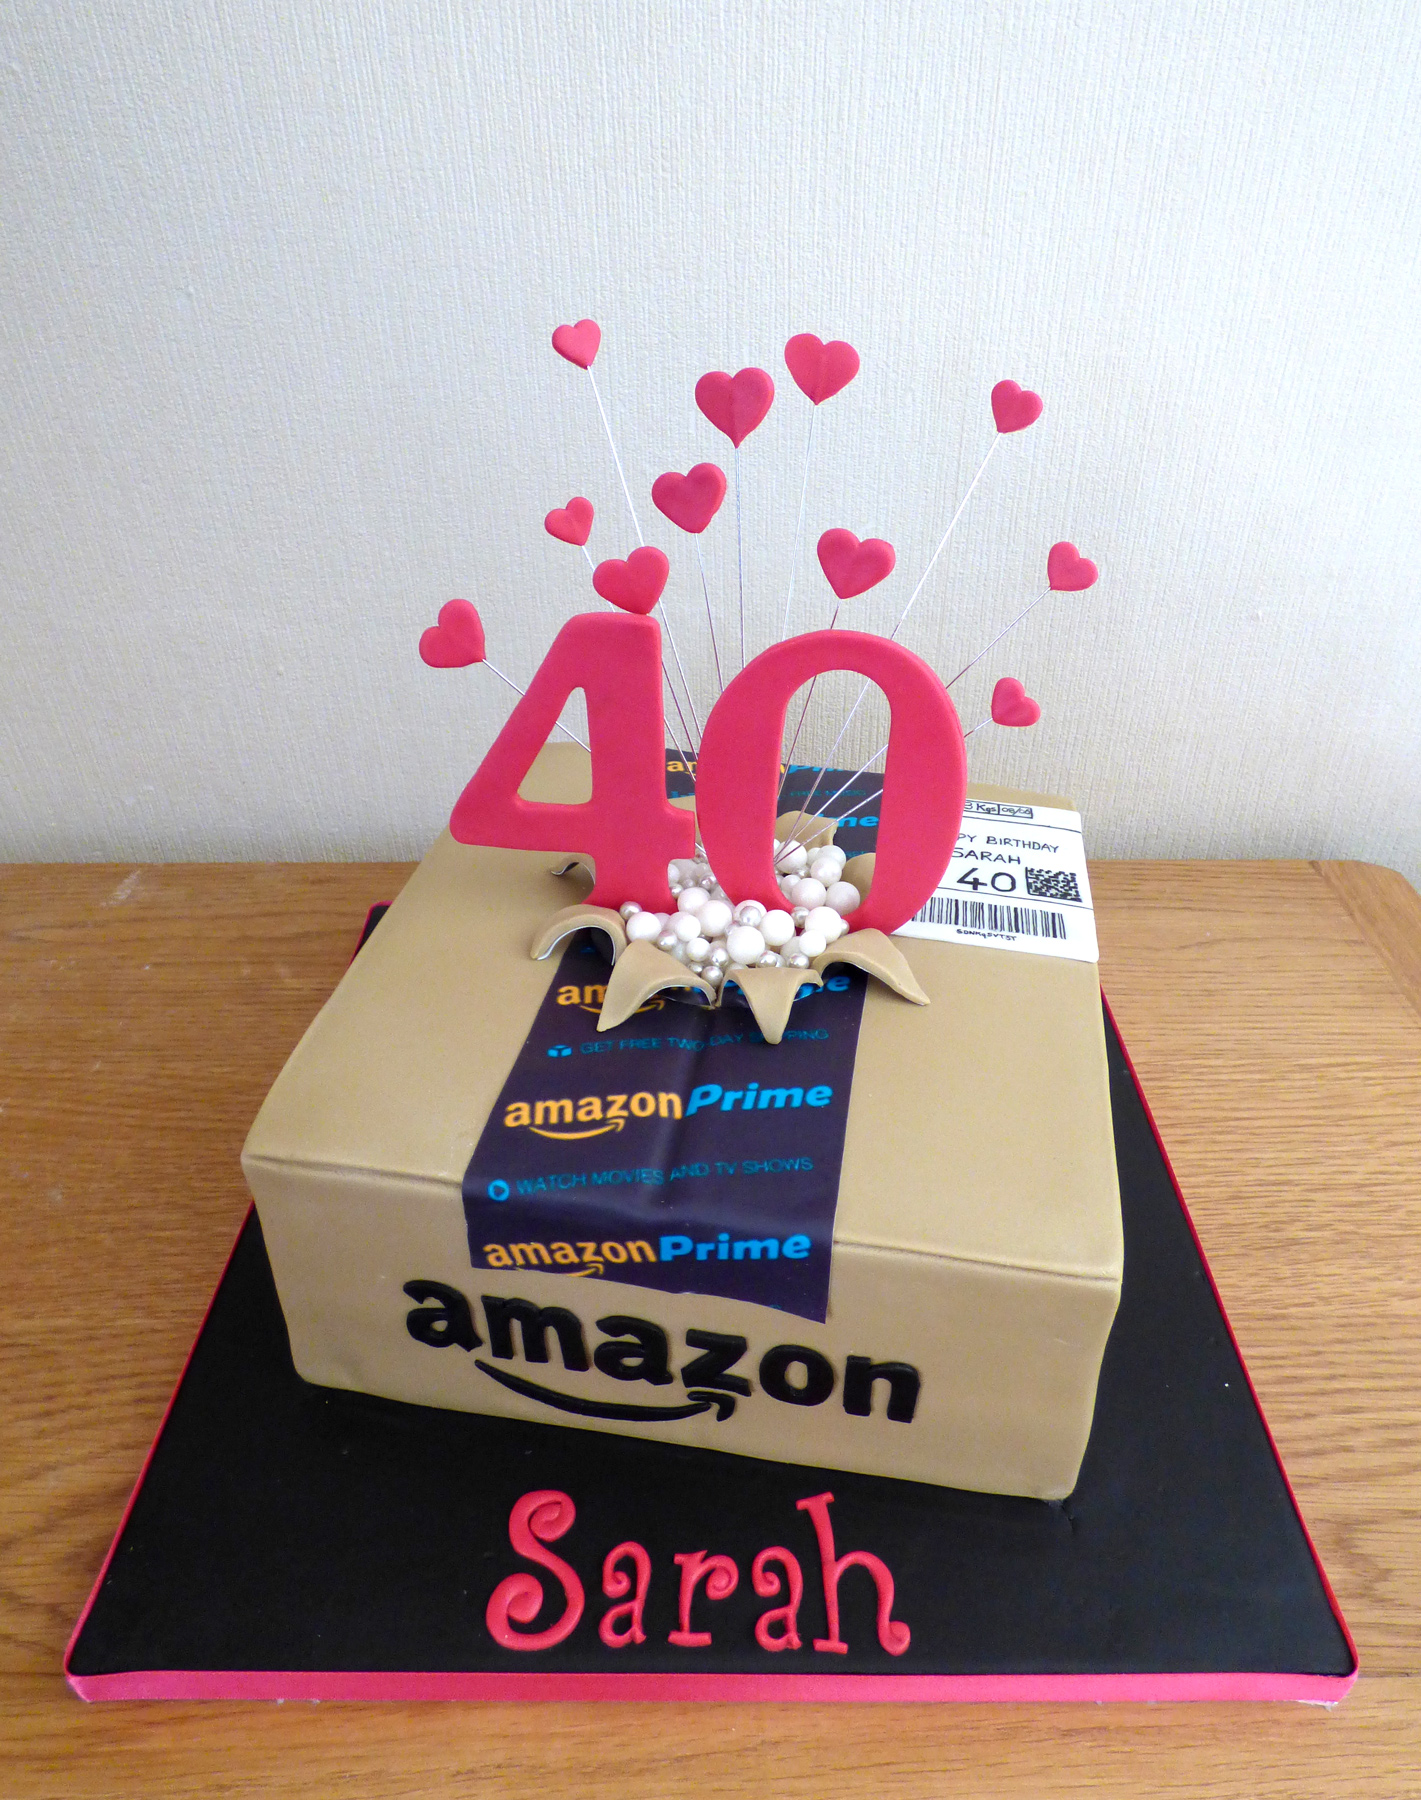 Share more than 87 amazon cake delivery usa latest - in.daotaonec